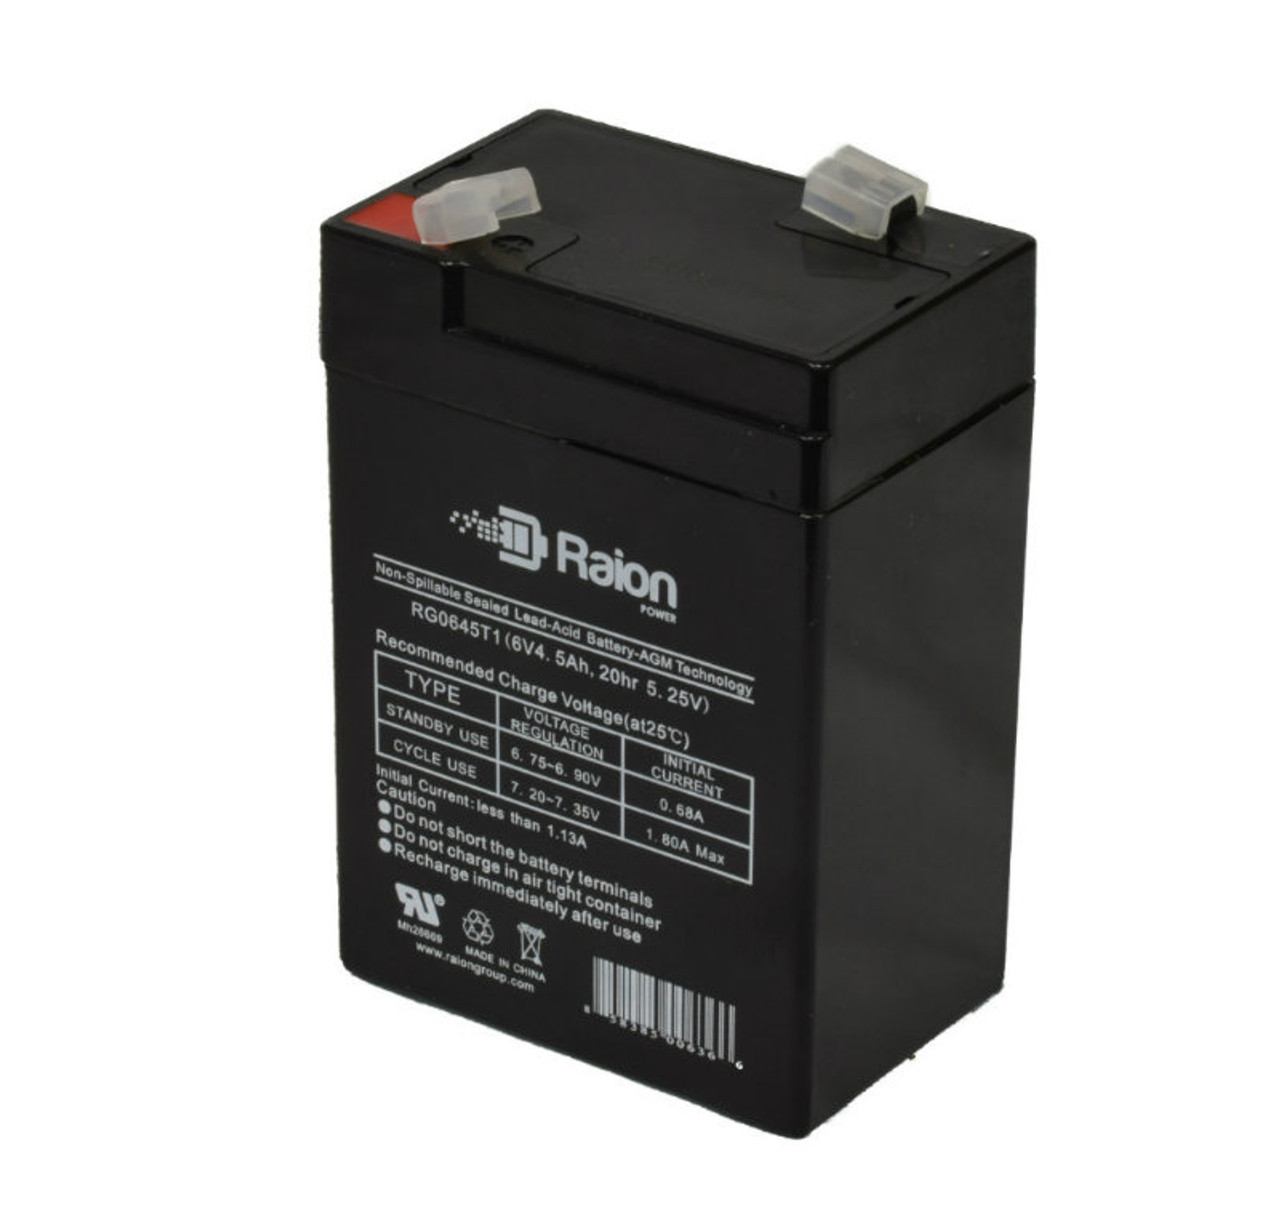 Raion Power RG0645T1 6V 4.5Ah Replacement Battery Cartridge for Long Way LW-3FM4.2W